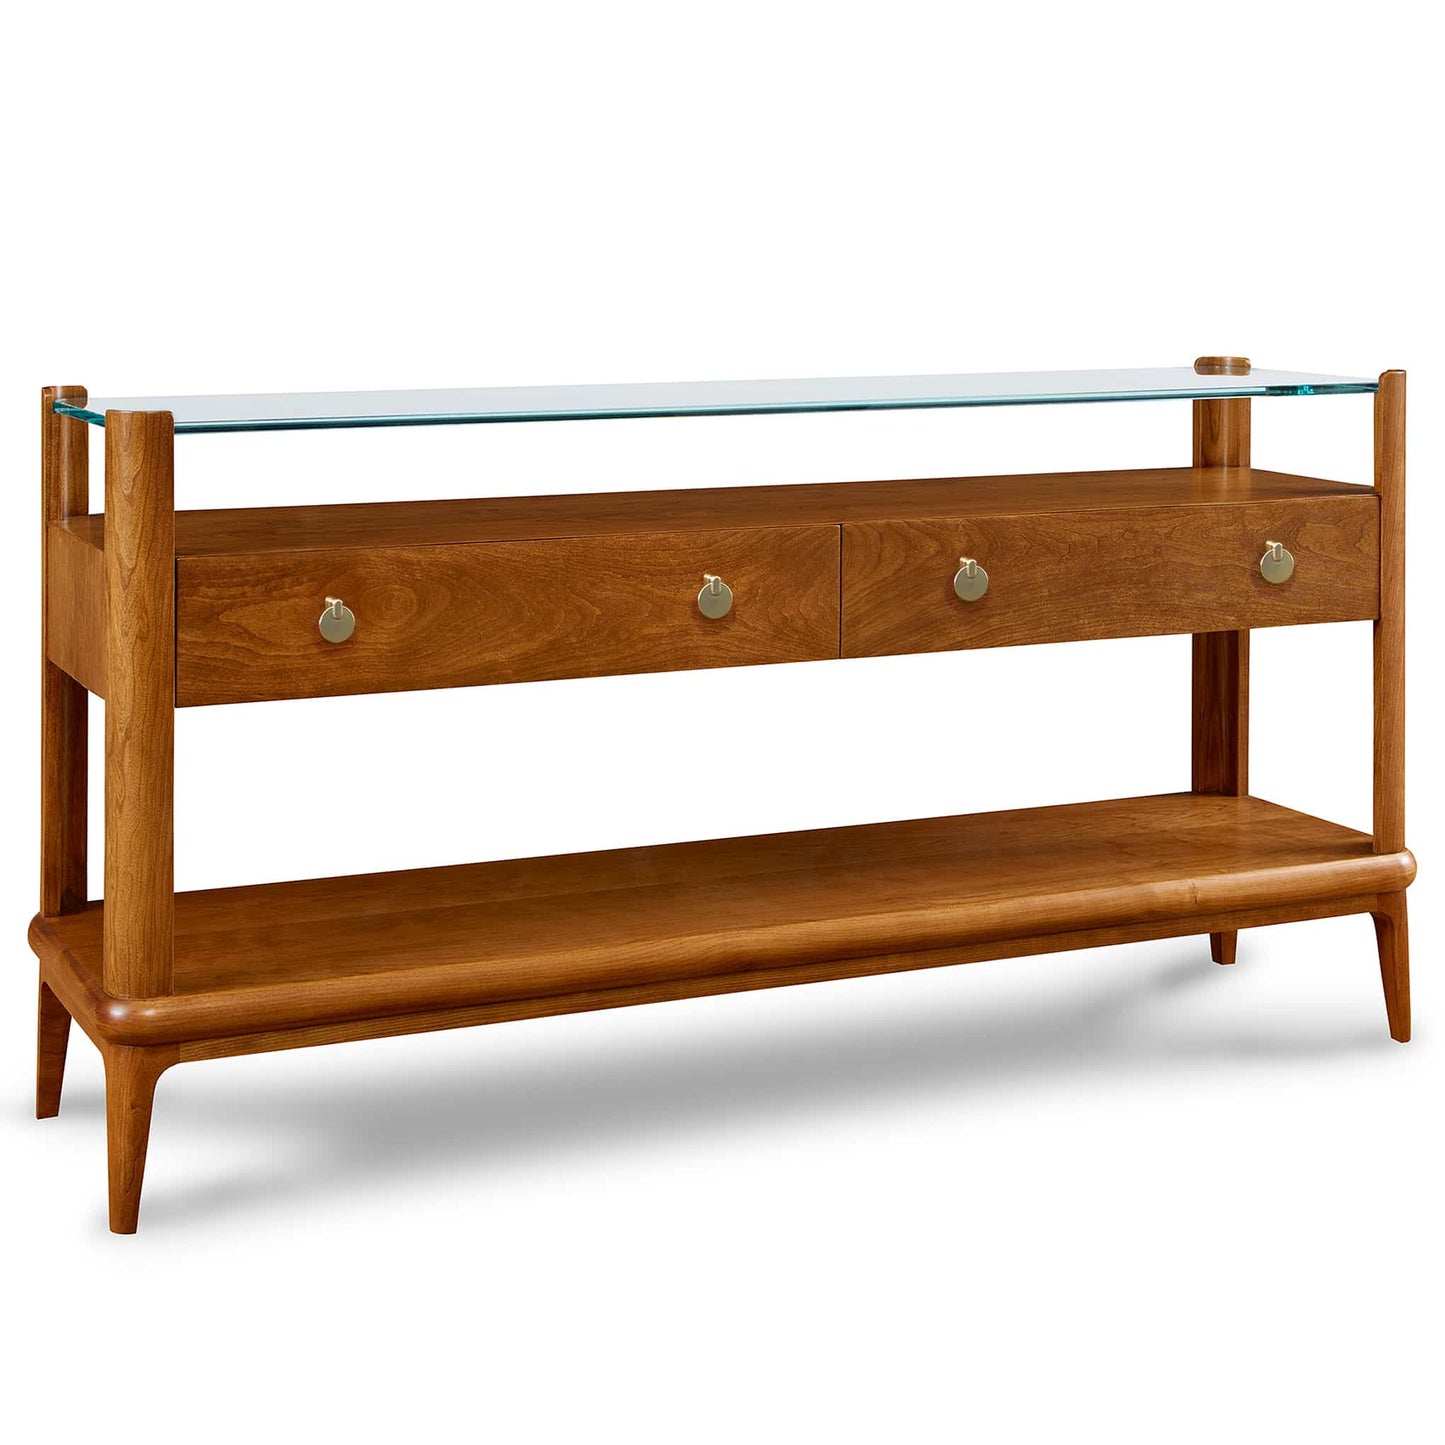 Martine Glass-Top Console Table - Stickley Brand